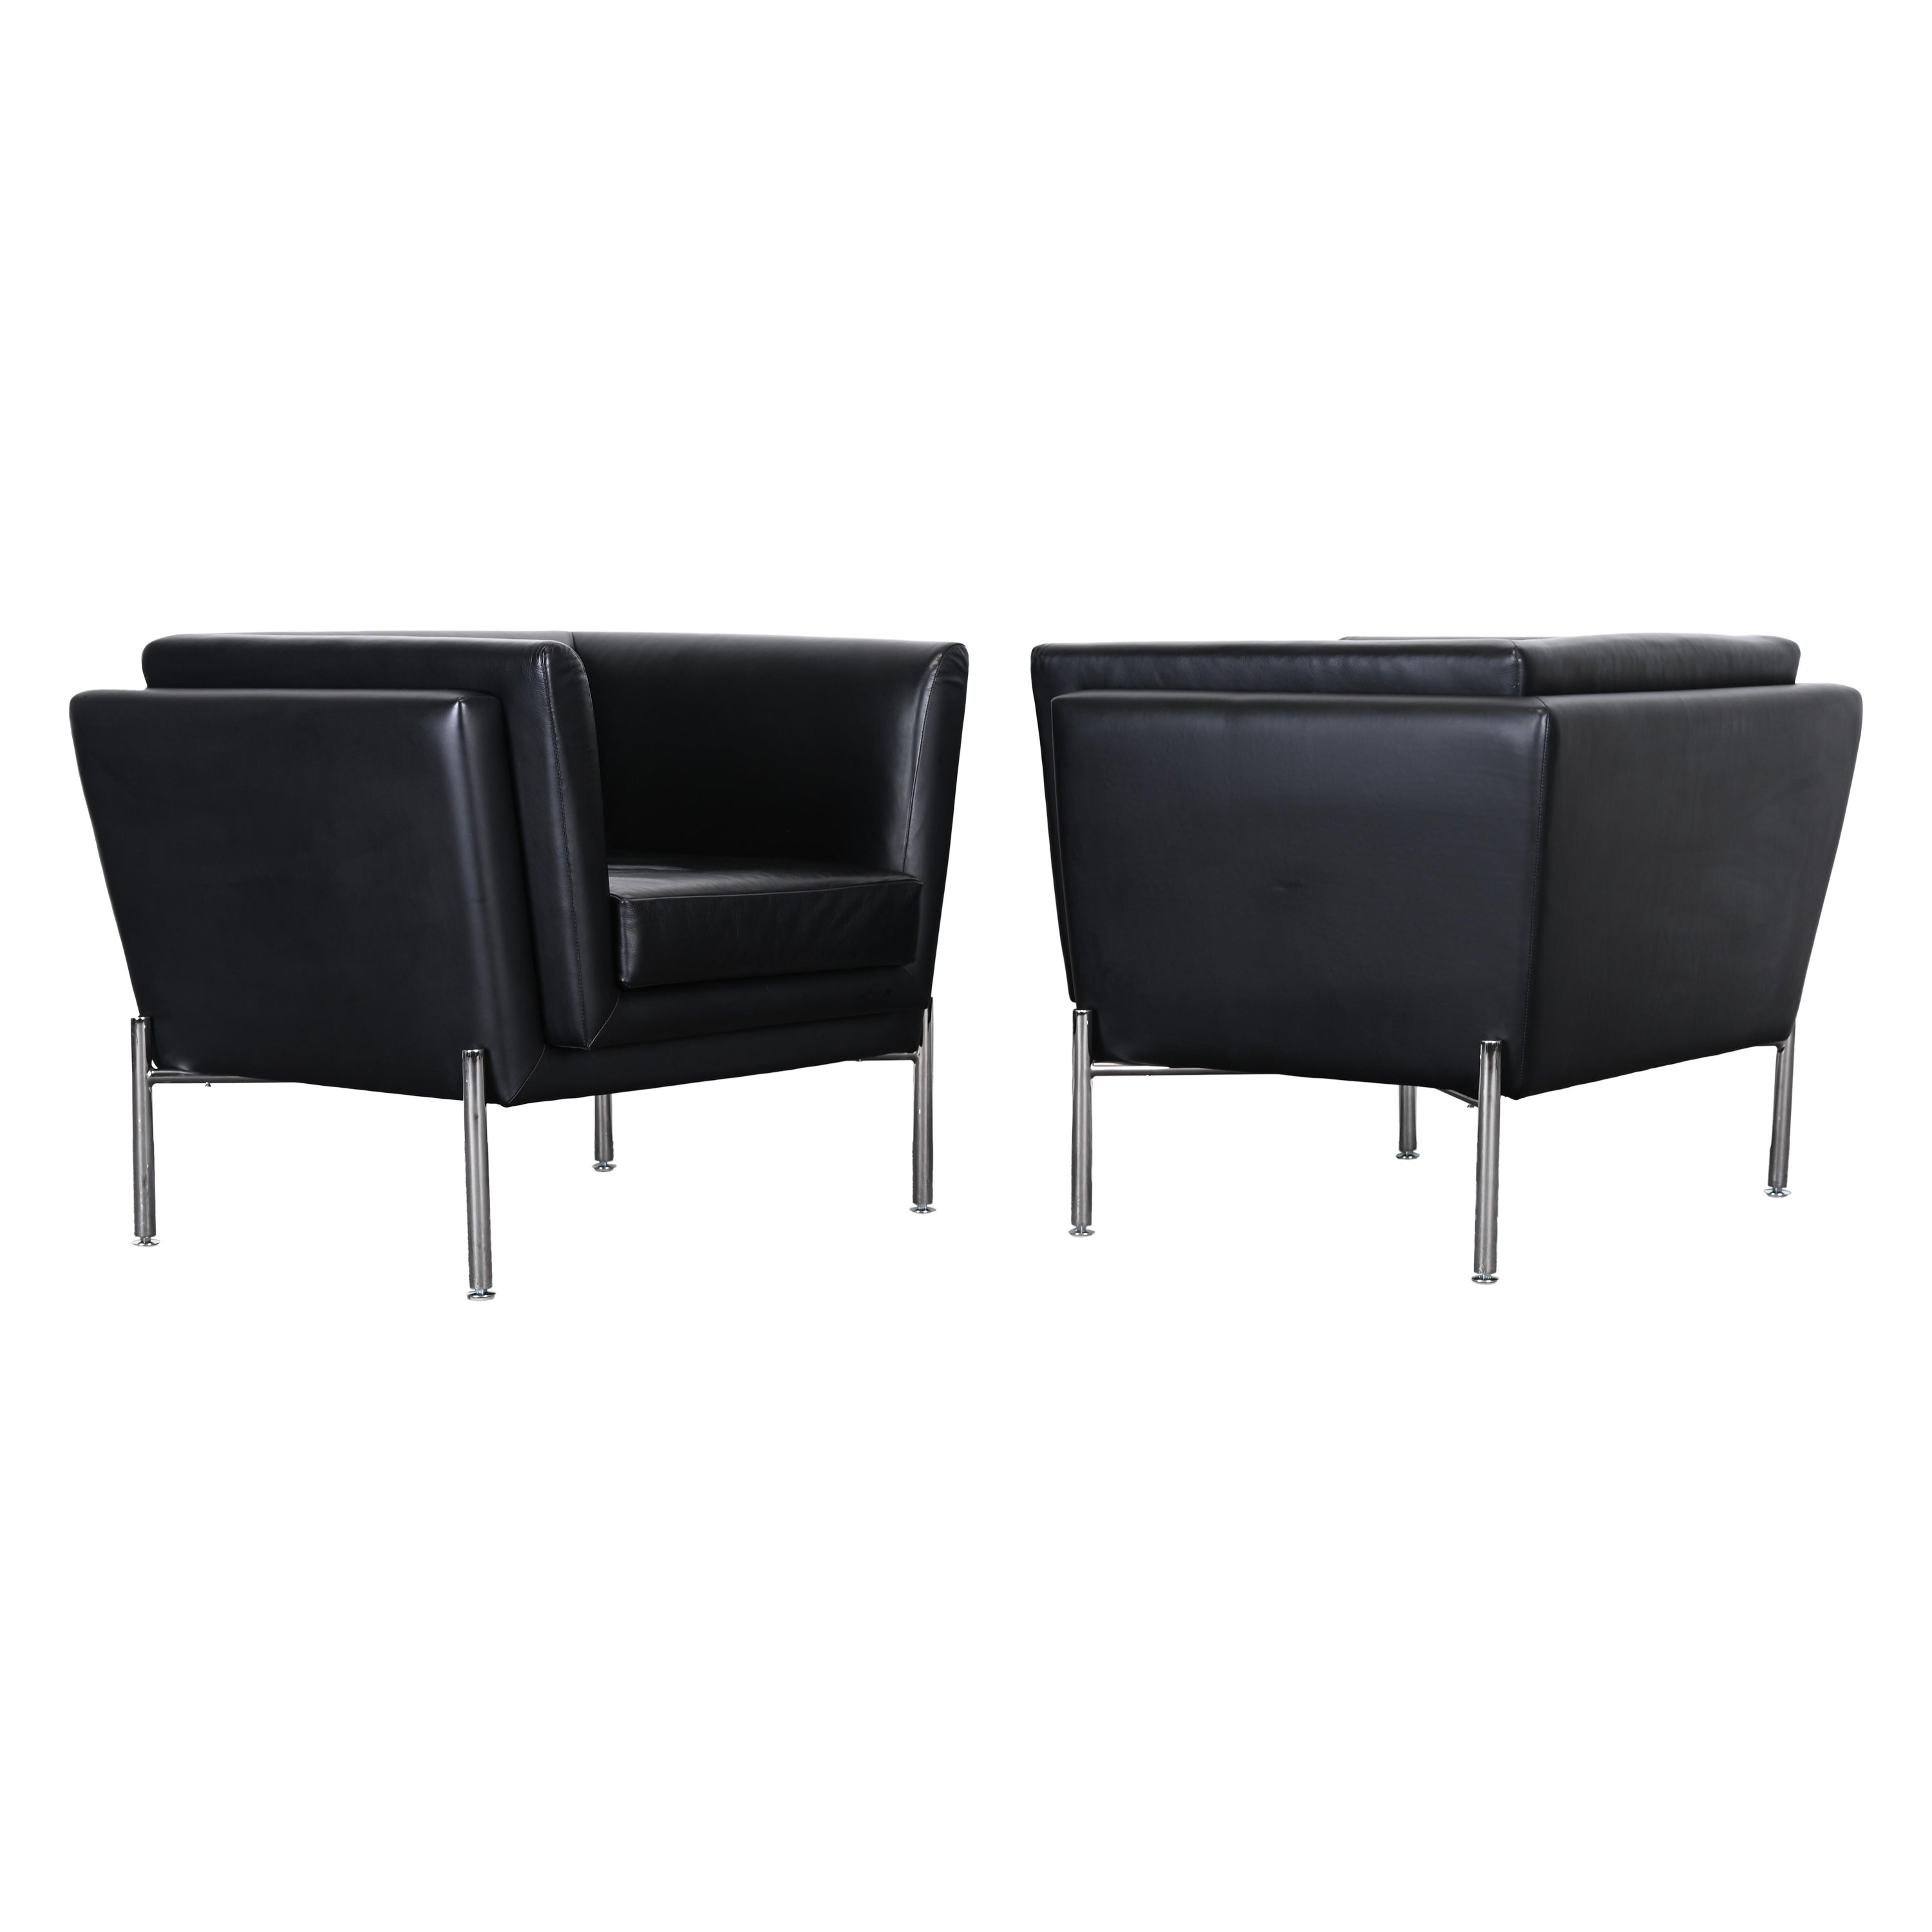 Pair of Leather and Stainless Steel Lounge Chairs by Brueton, 20th Century For Sale